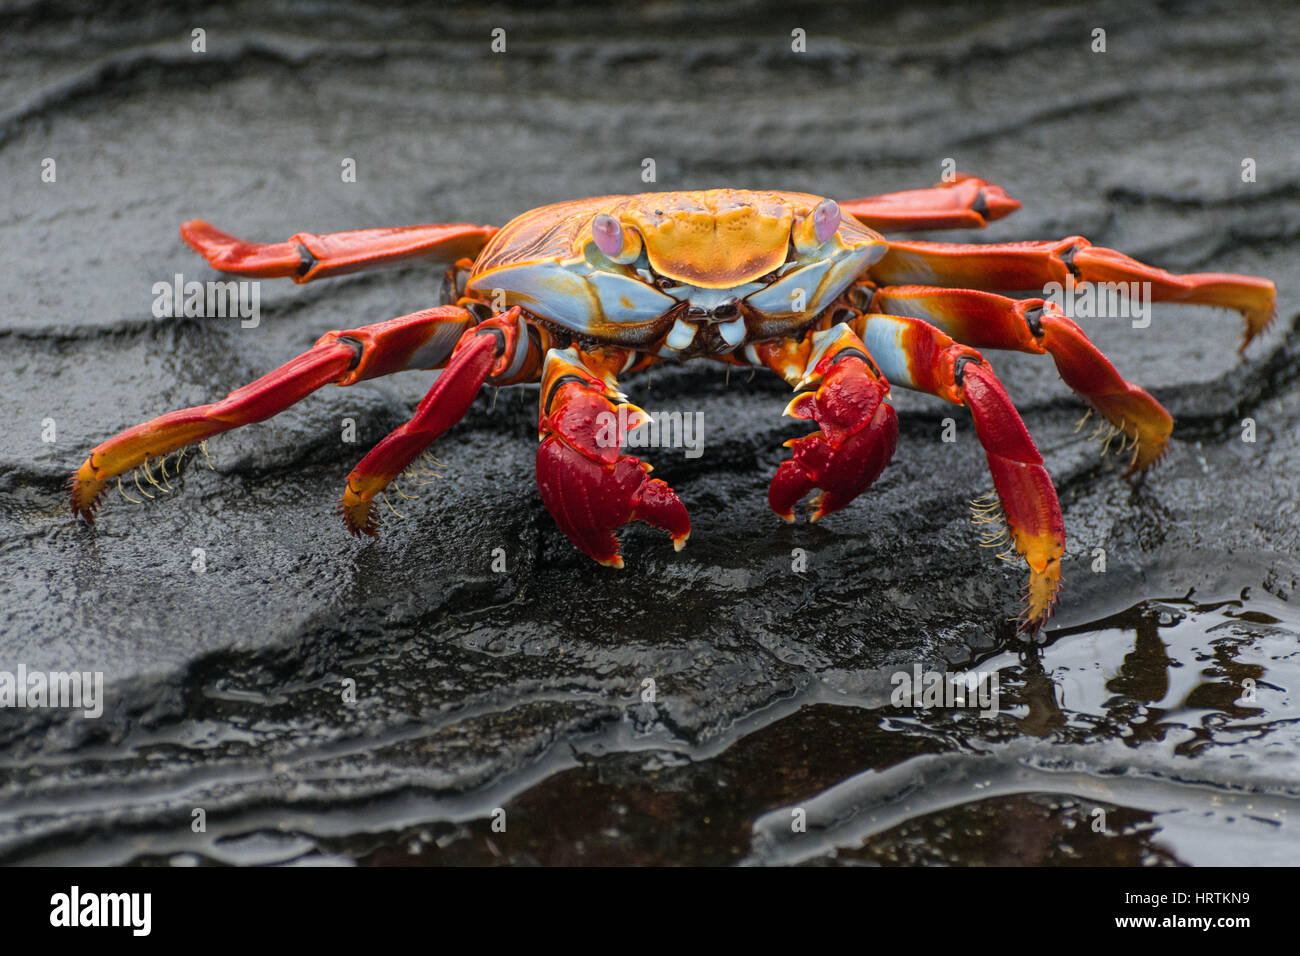 Brilliantly colored Sally Lightfoot crab (Grapsus grapsus) searching for food near the sea in the Galapagos Islands, Ecuador. Stock Photo